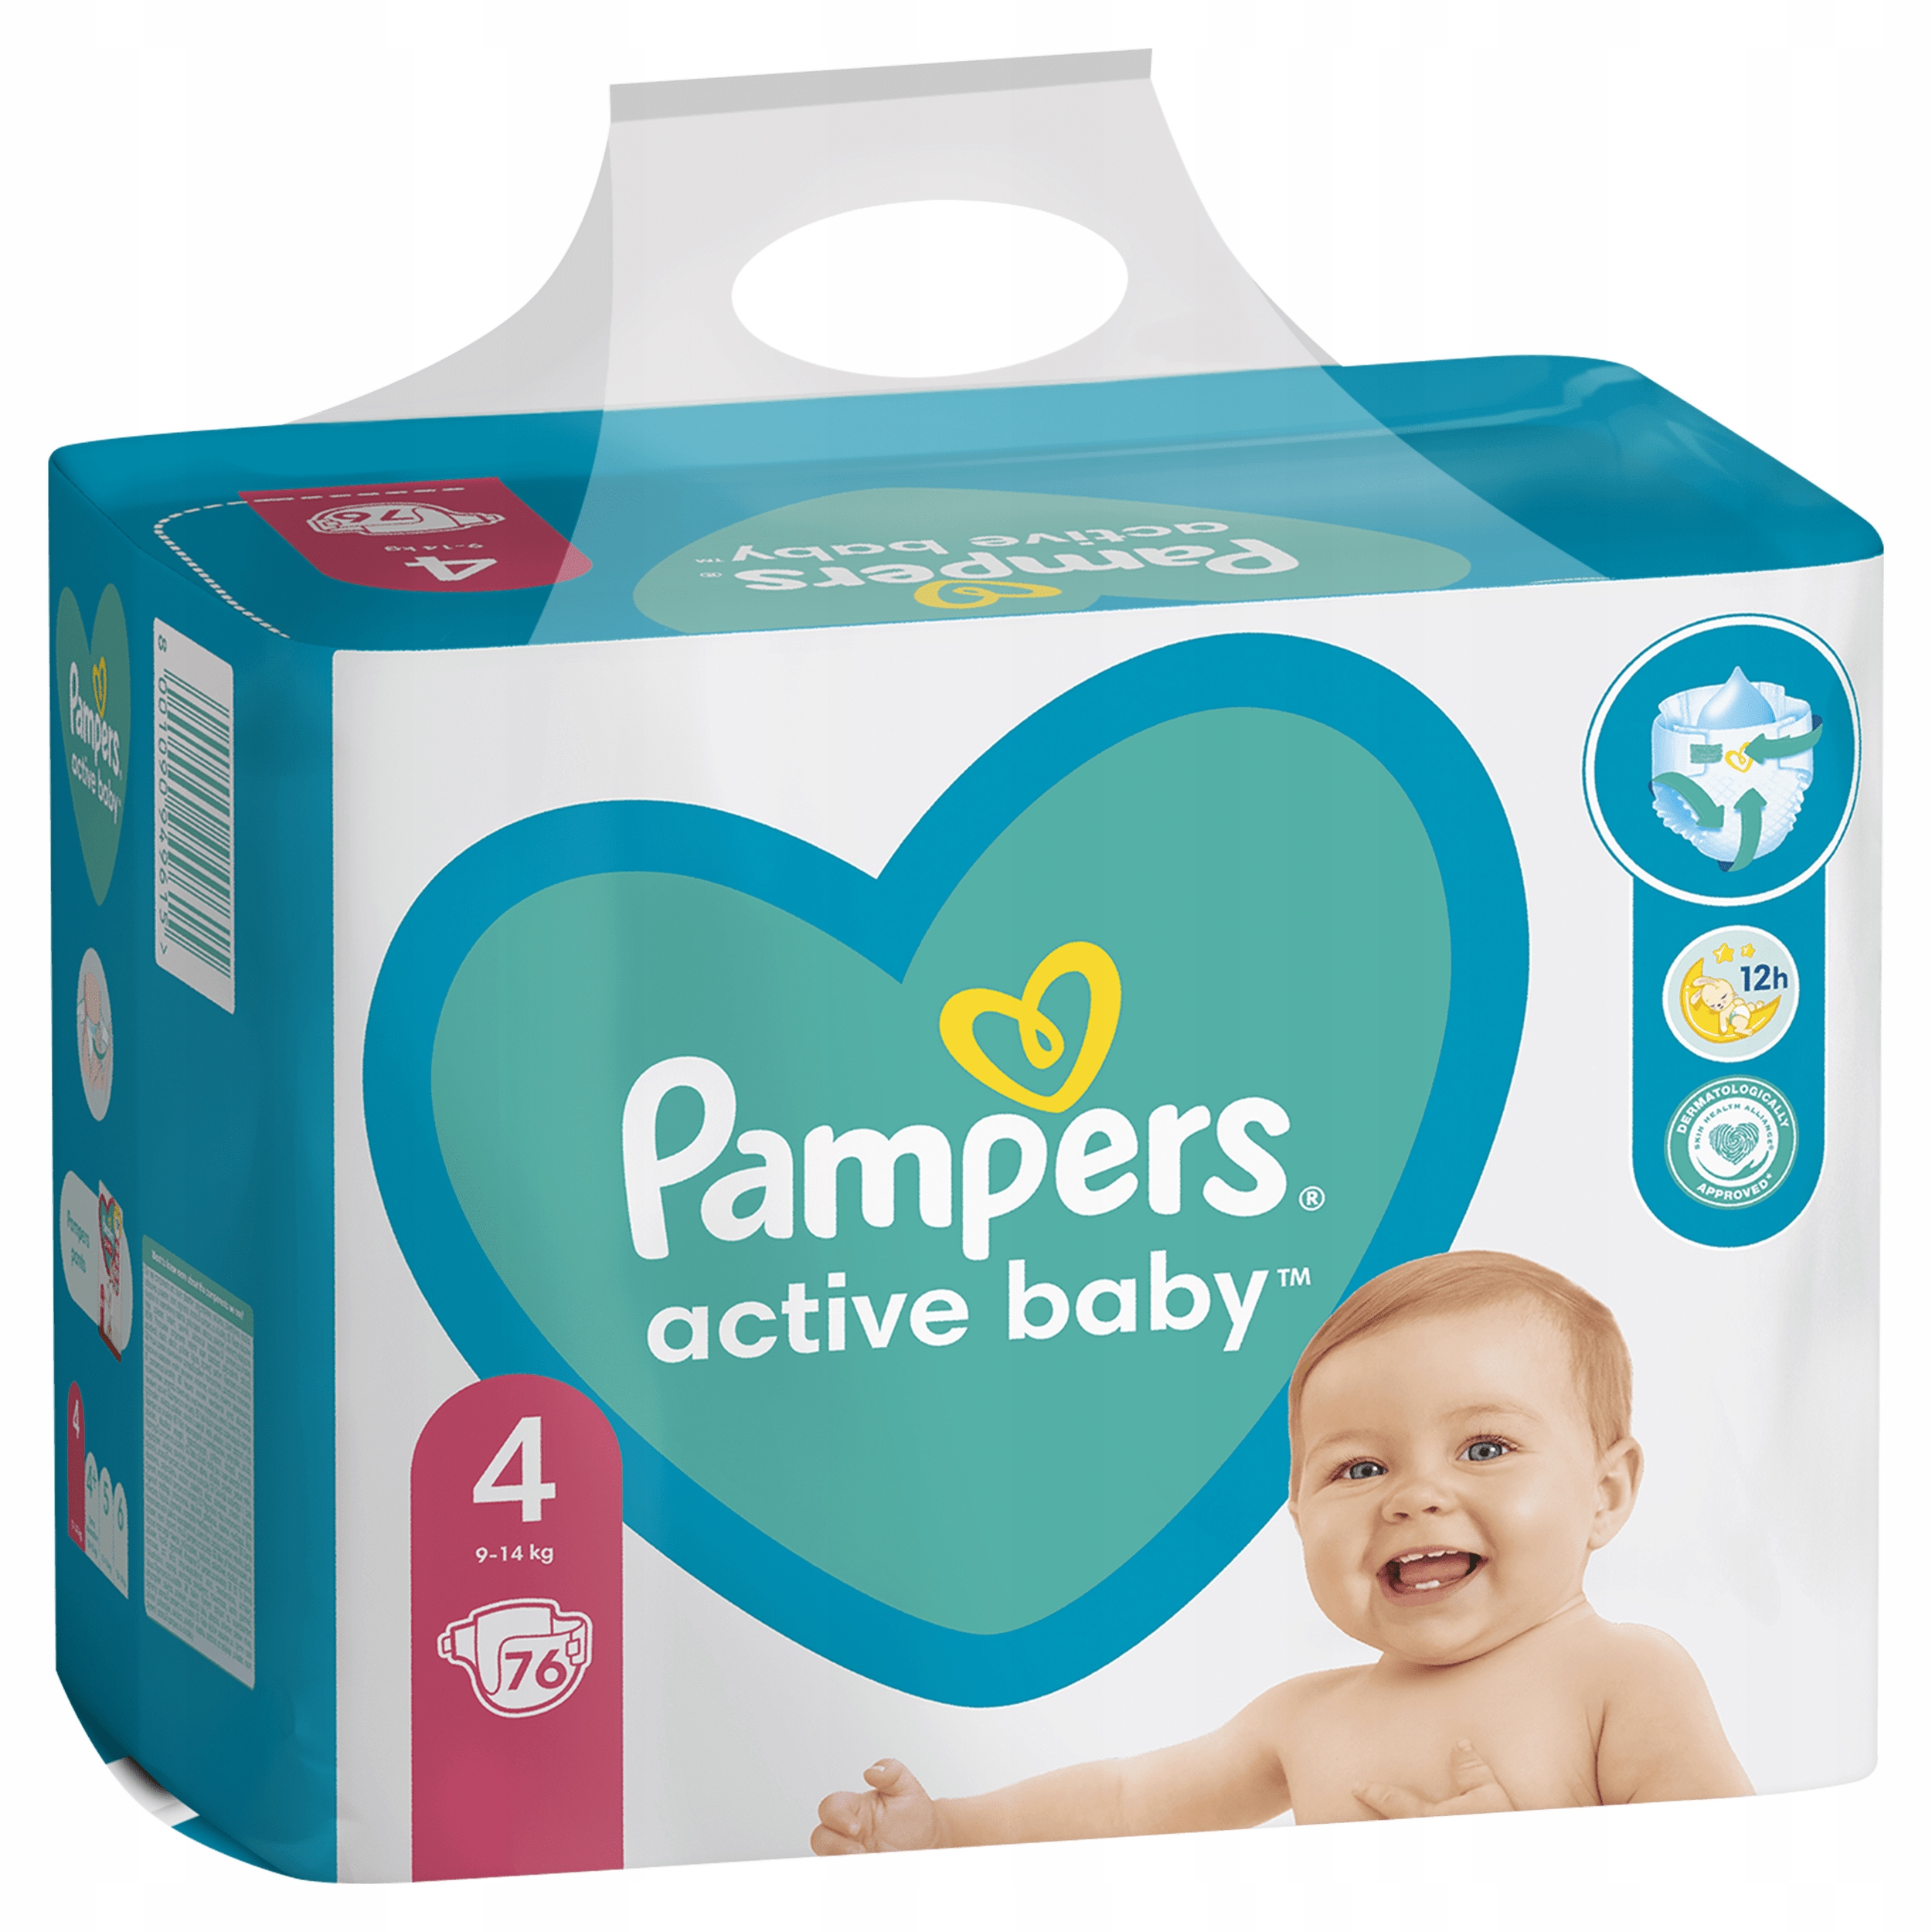 pampers play and sleep 4 netto